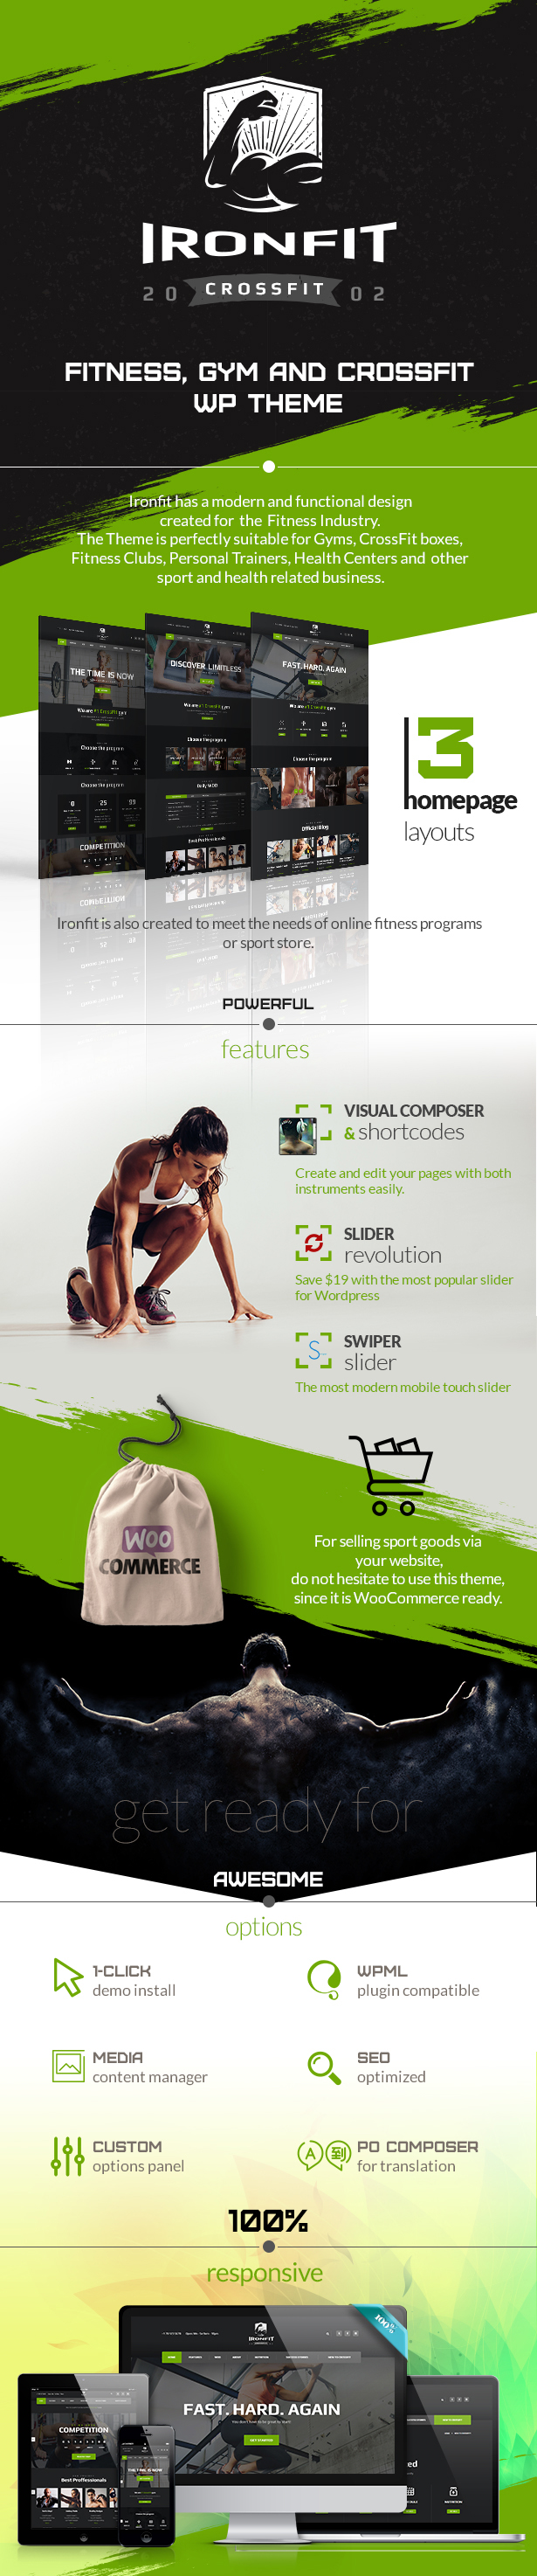 Fitness, Gym and Crossfit WordPress Theme features